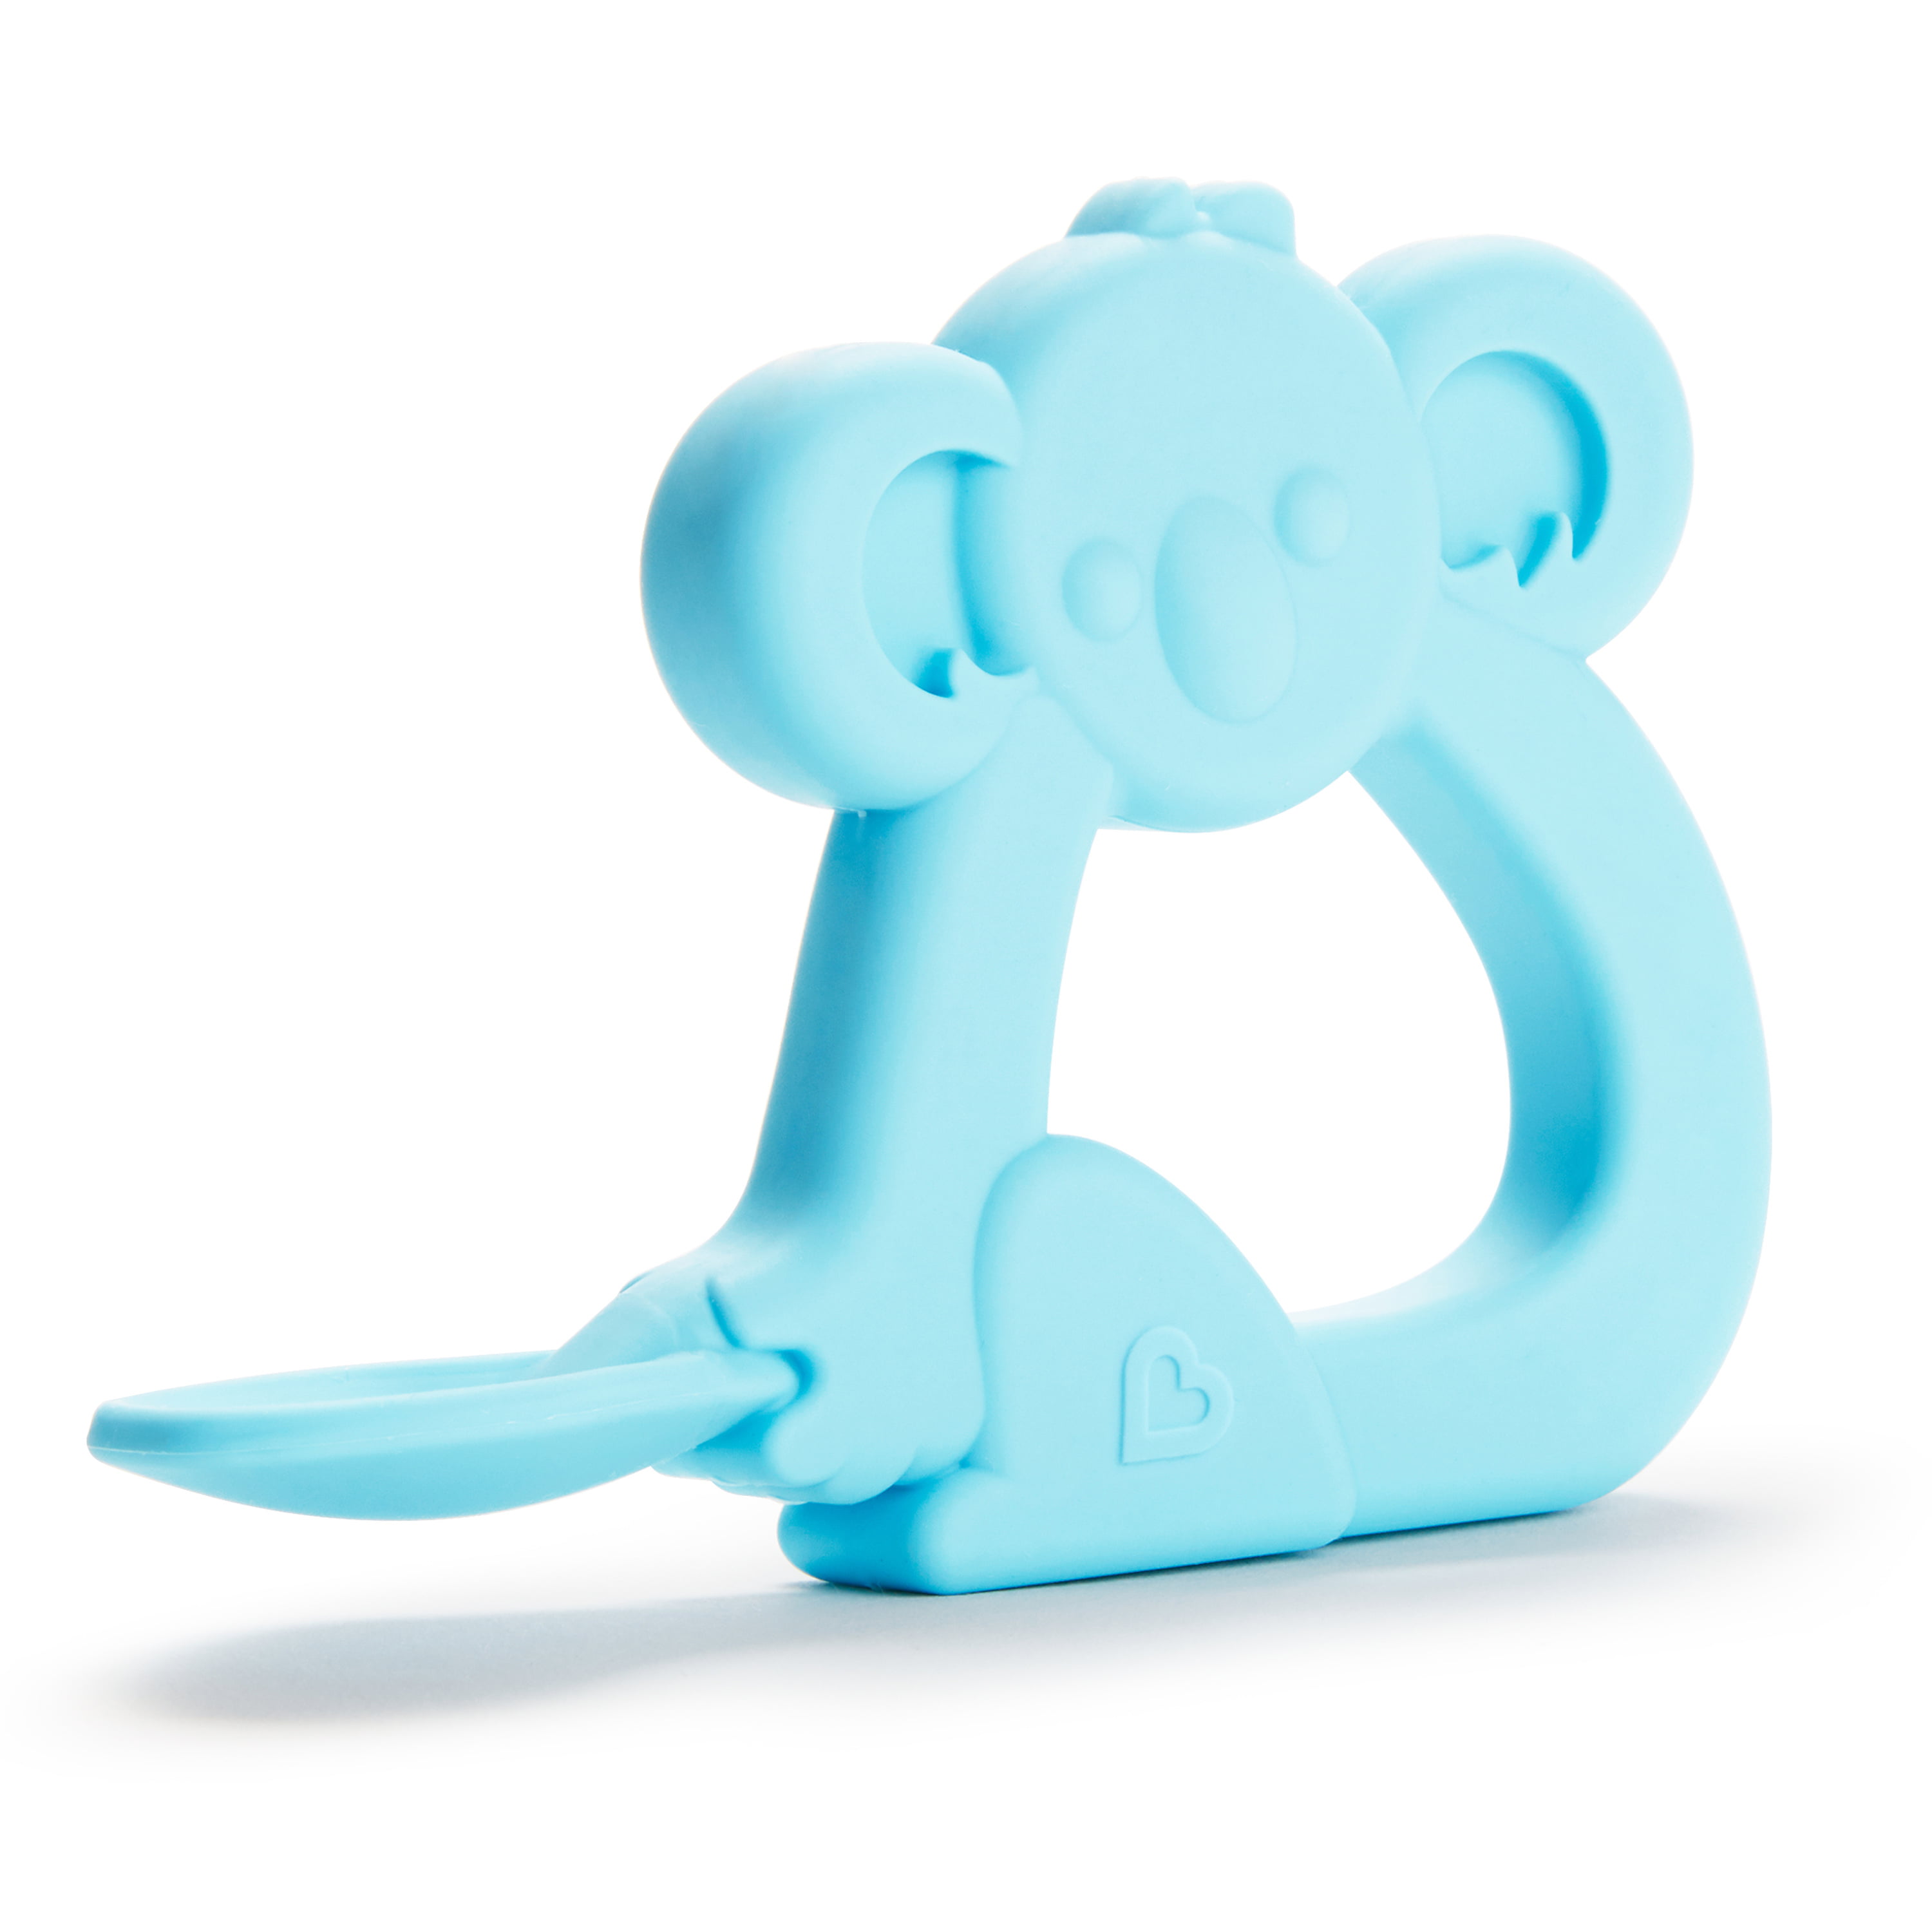 Munchkin The Baby Toon™ Silicone Teething Spoon, Mint (As Seen On